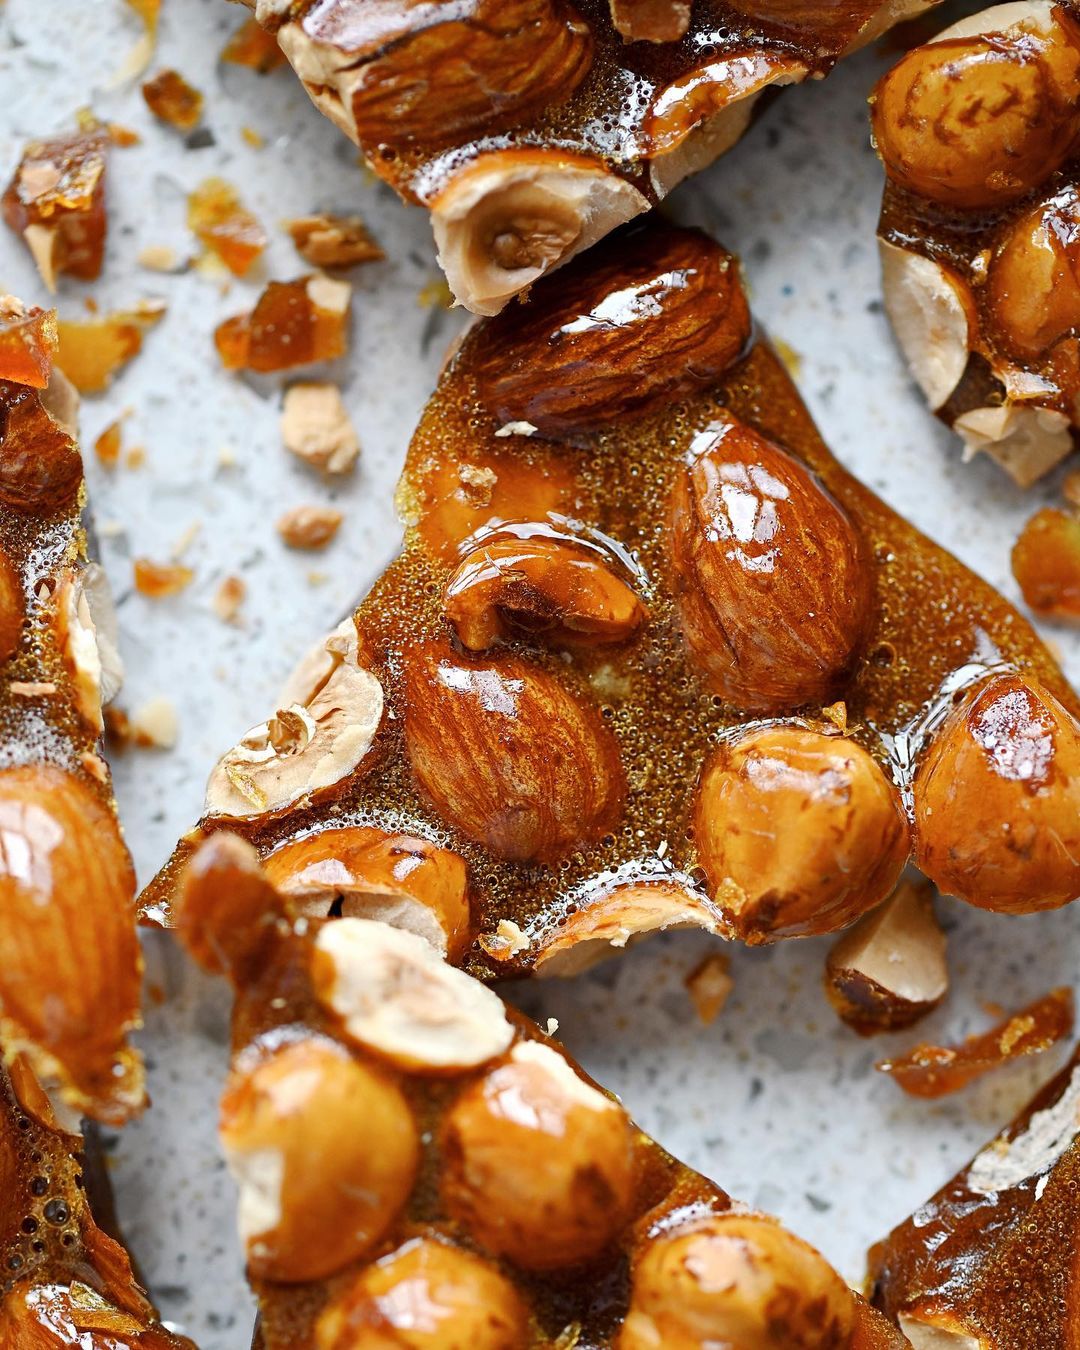 Grillage (candied roasted nuts)